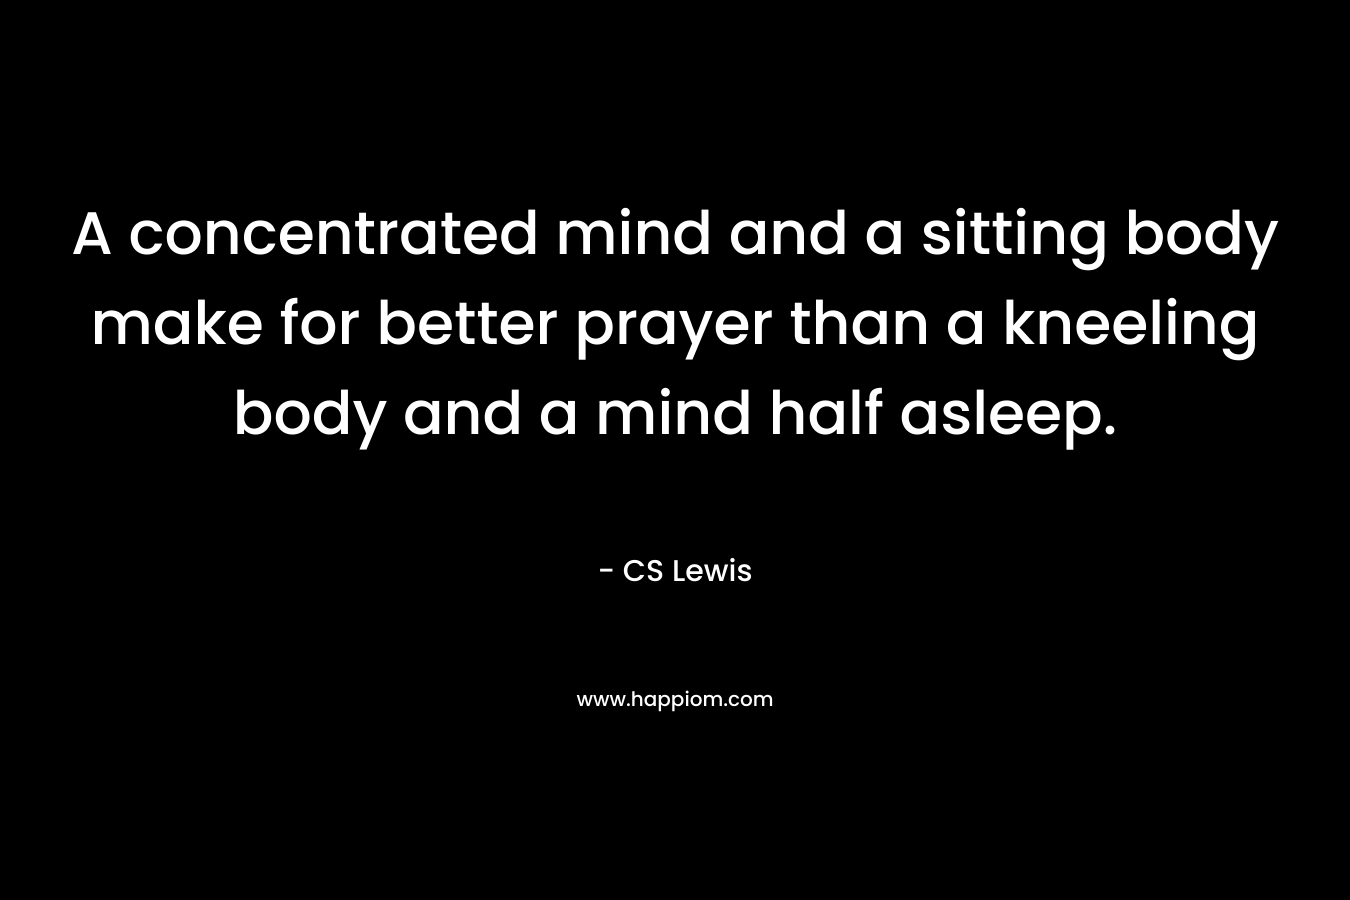 A concentrated mind and a sitting body make for better prayer than a kneeling body and a mind half asleep. – CS Lewis